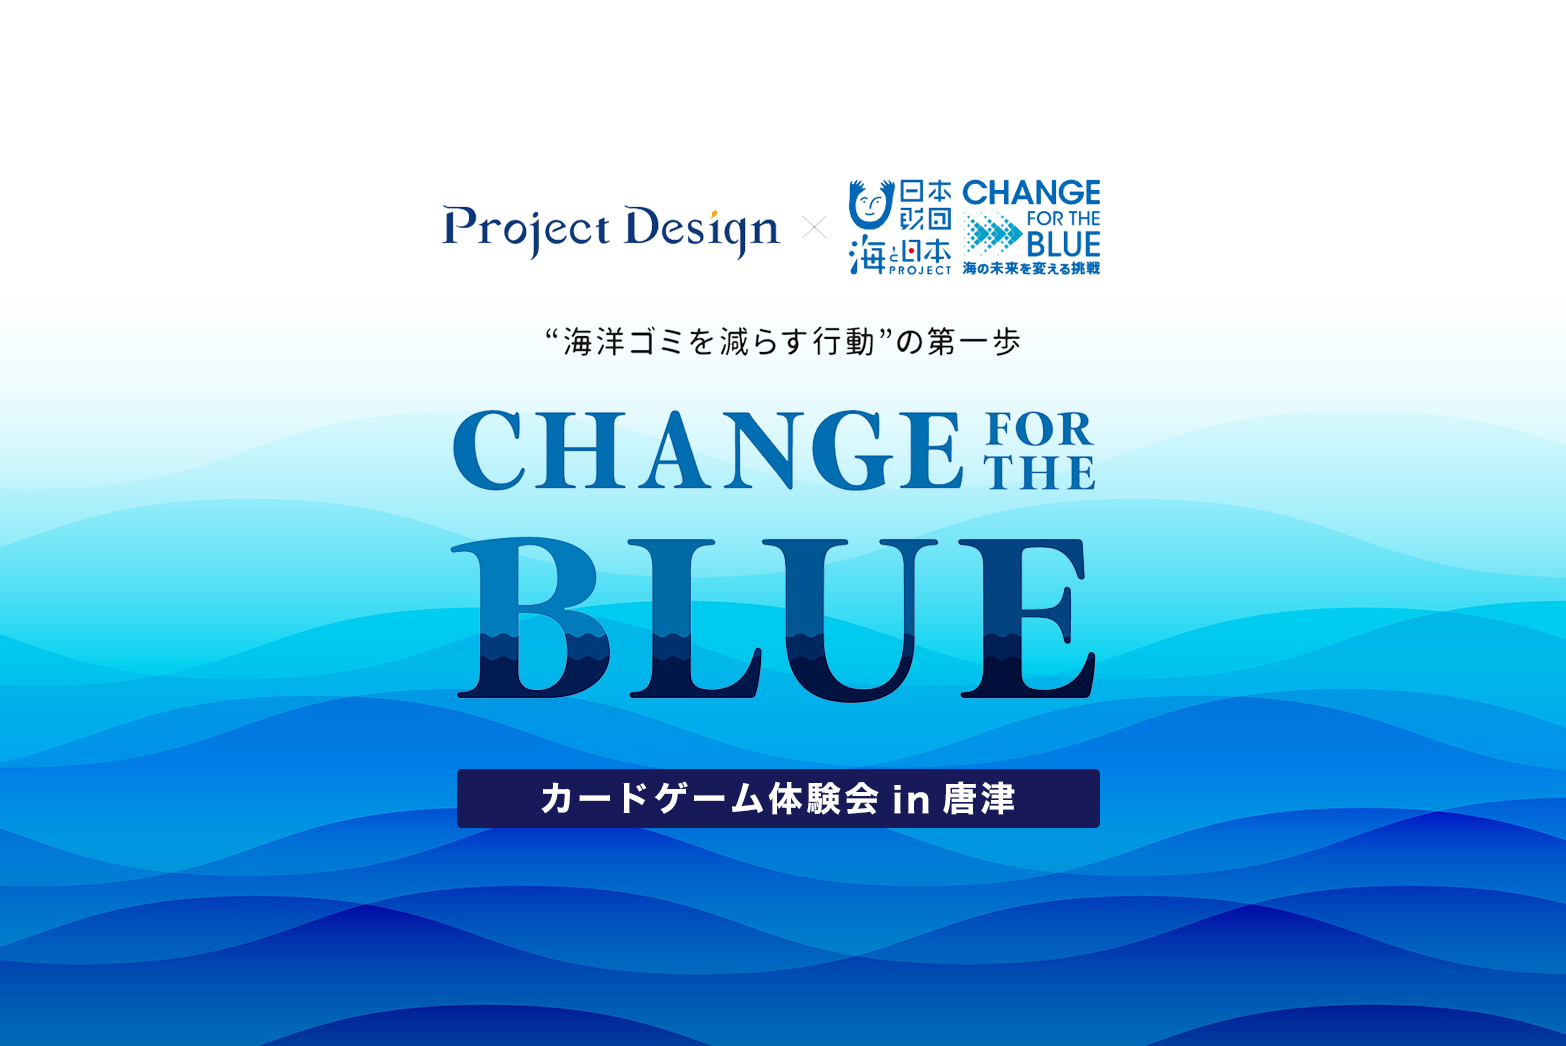 CHANGE FOR THE BLUE